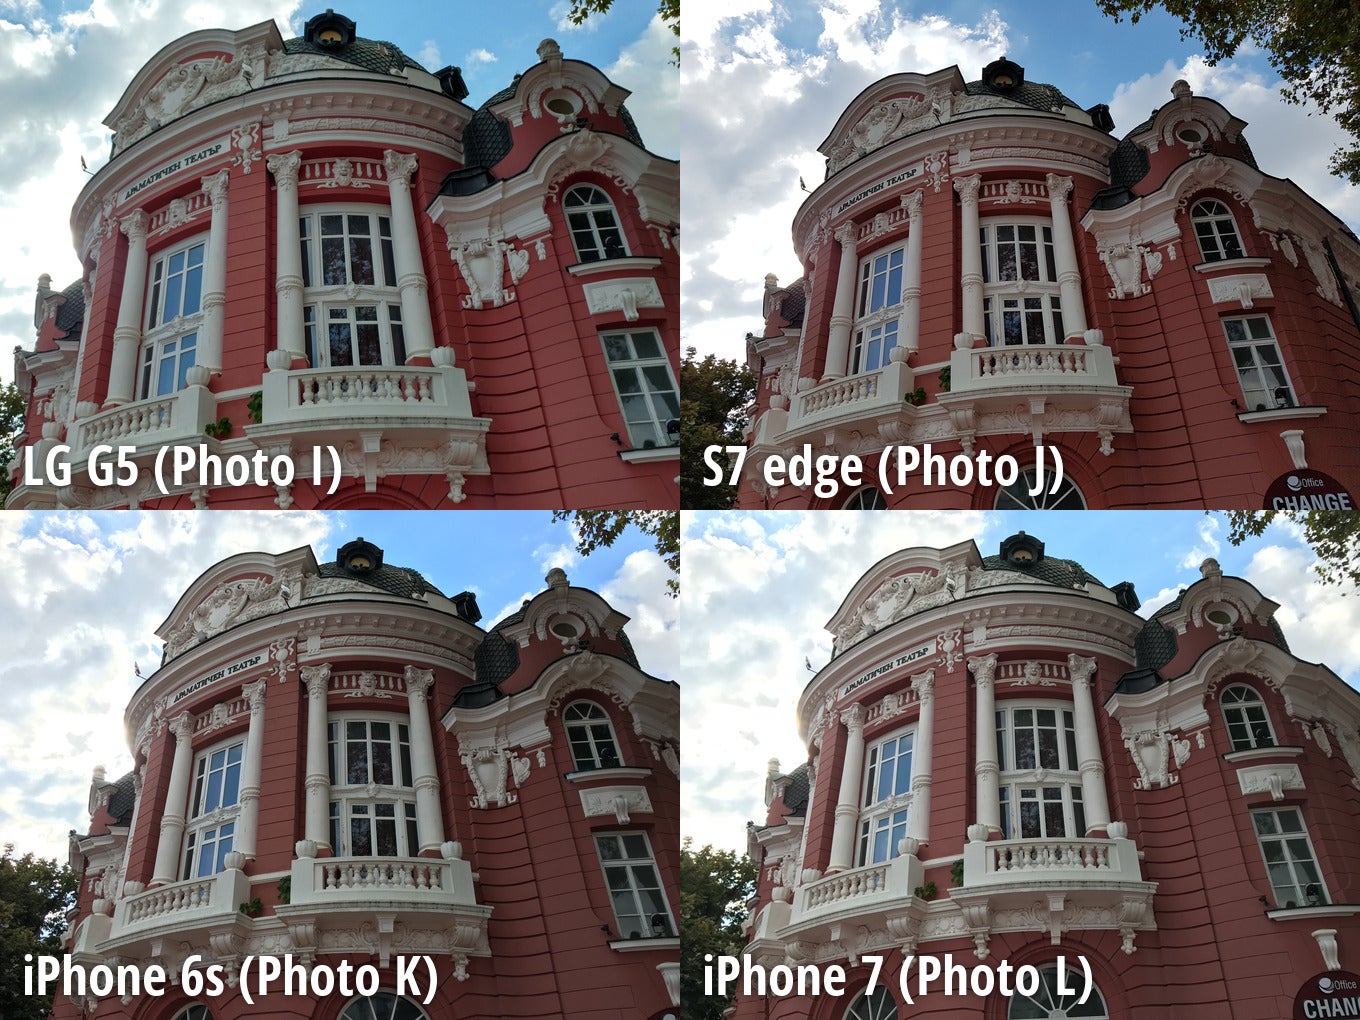 Samsung Galaxy S7 edge wins by a mile in our blind camera comparison, iPhone 7 is distant second